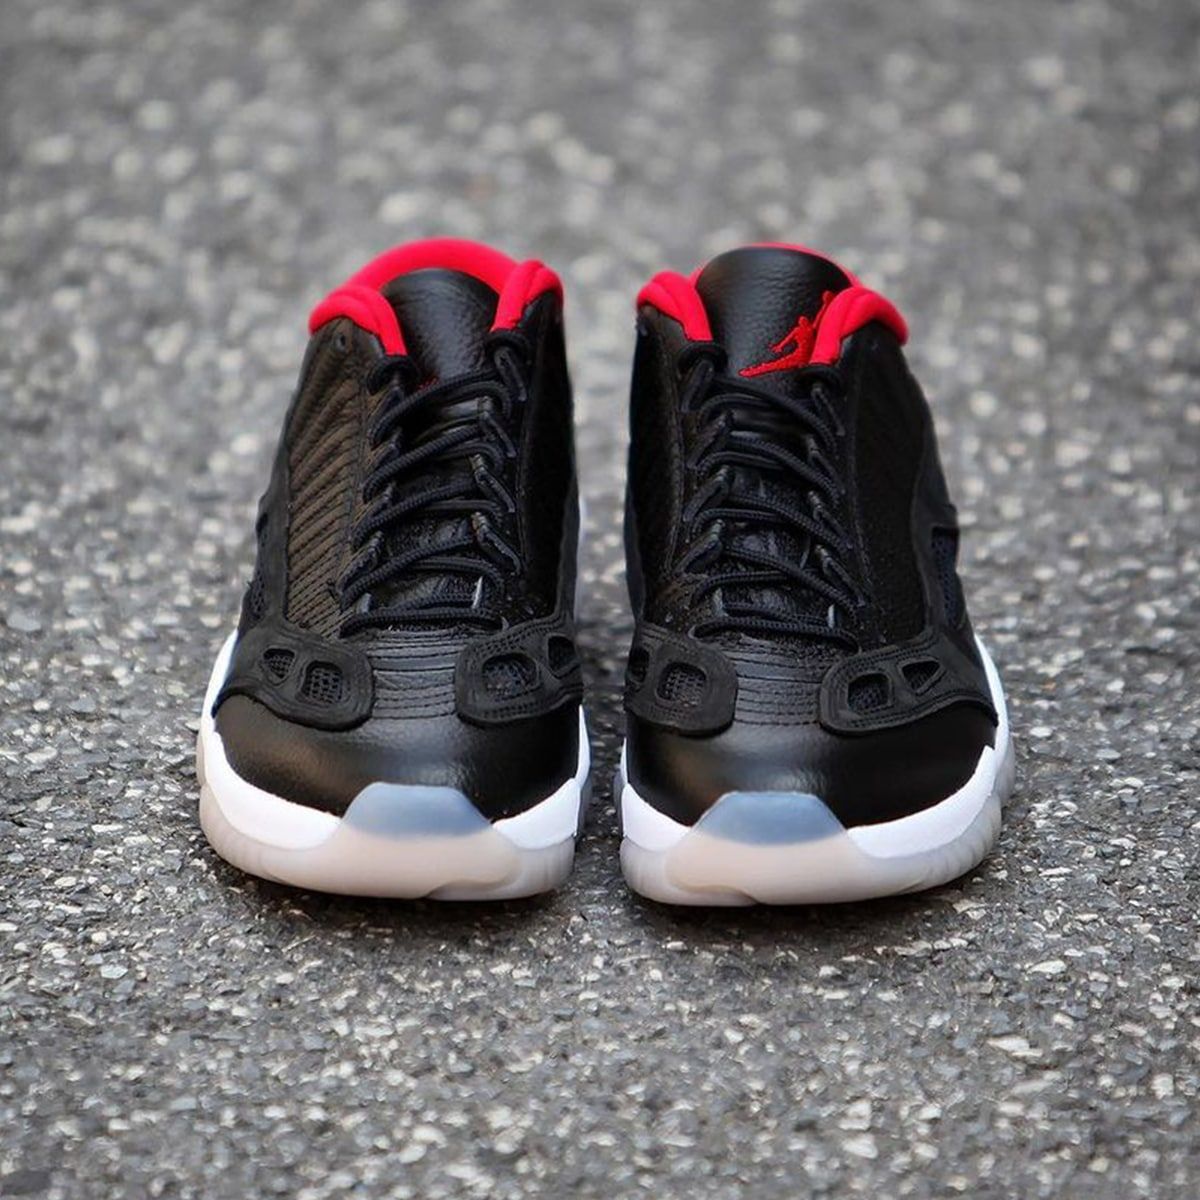 Where to Buy the Air Jordan 11 Low IE 